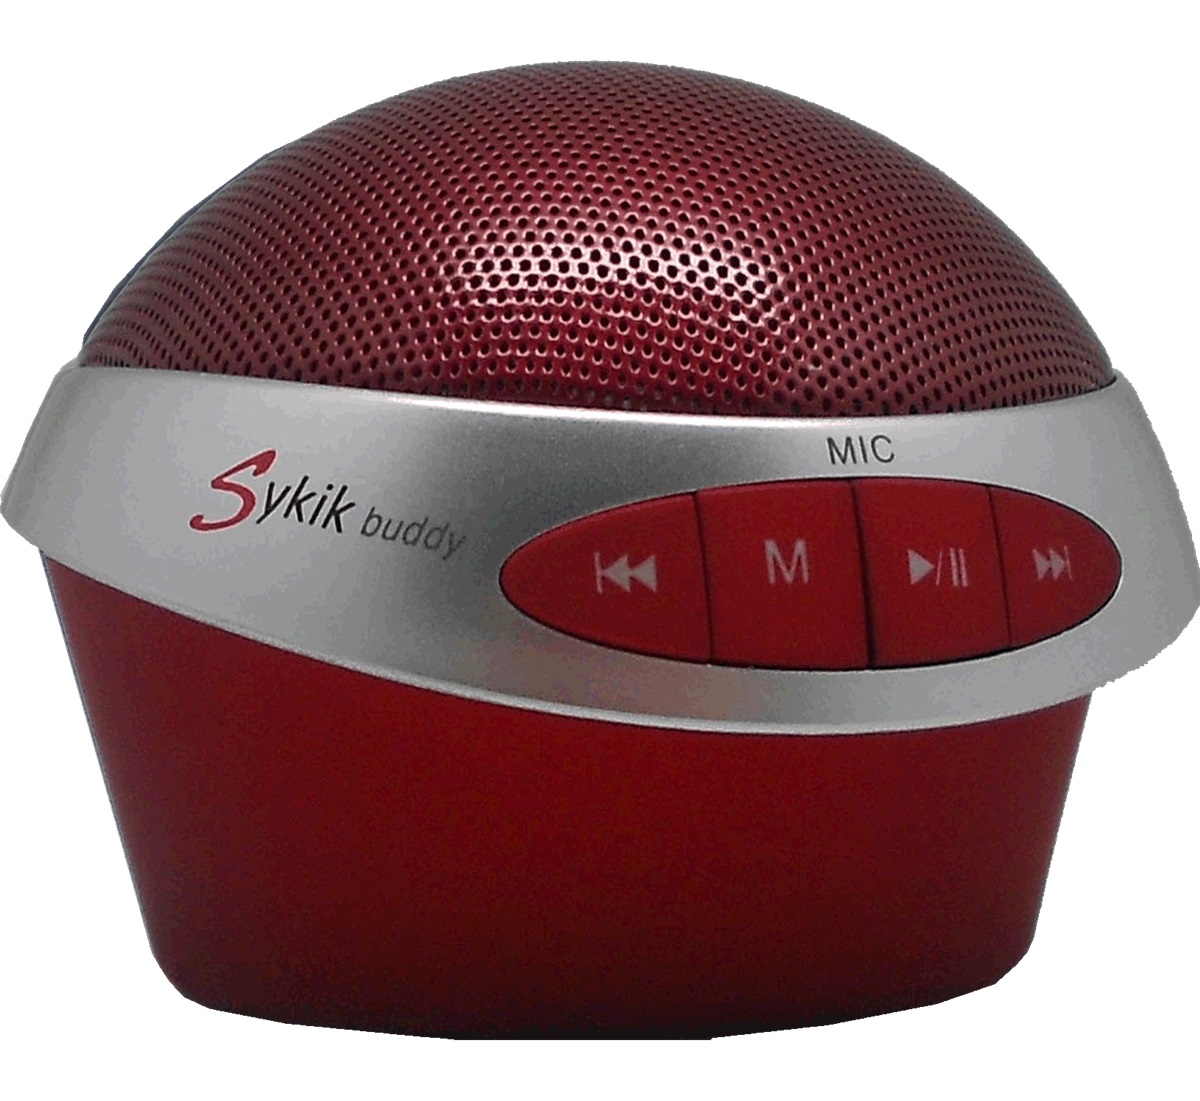 Sykik SP0301RD Bluetooth Portable Buddy, Red